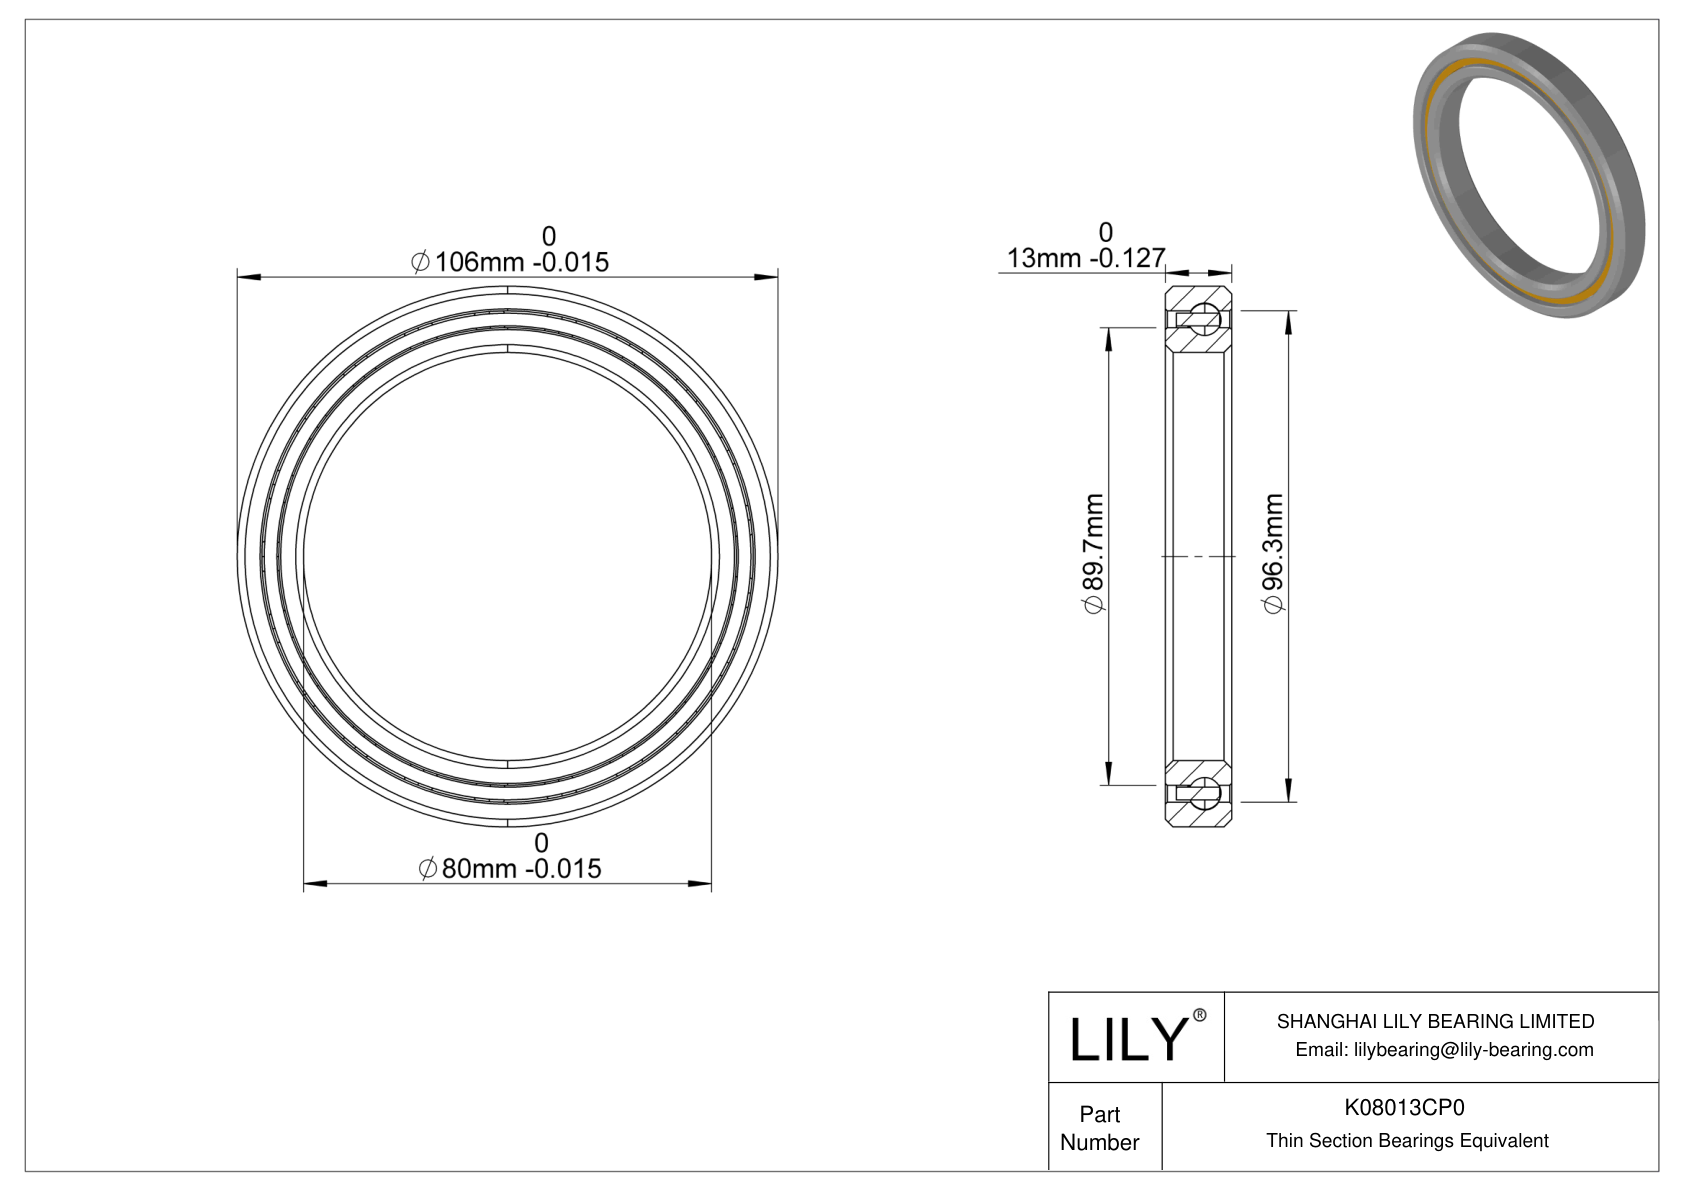 K08013CP0 Constant Section (CS) Bearings cad drawing